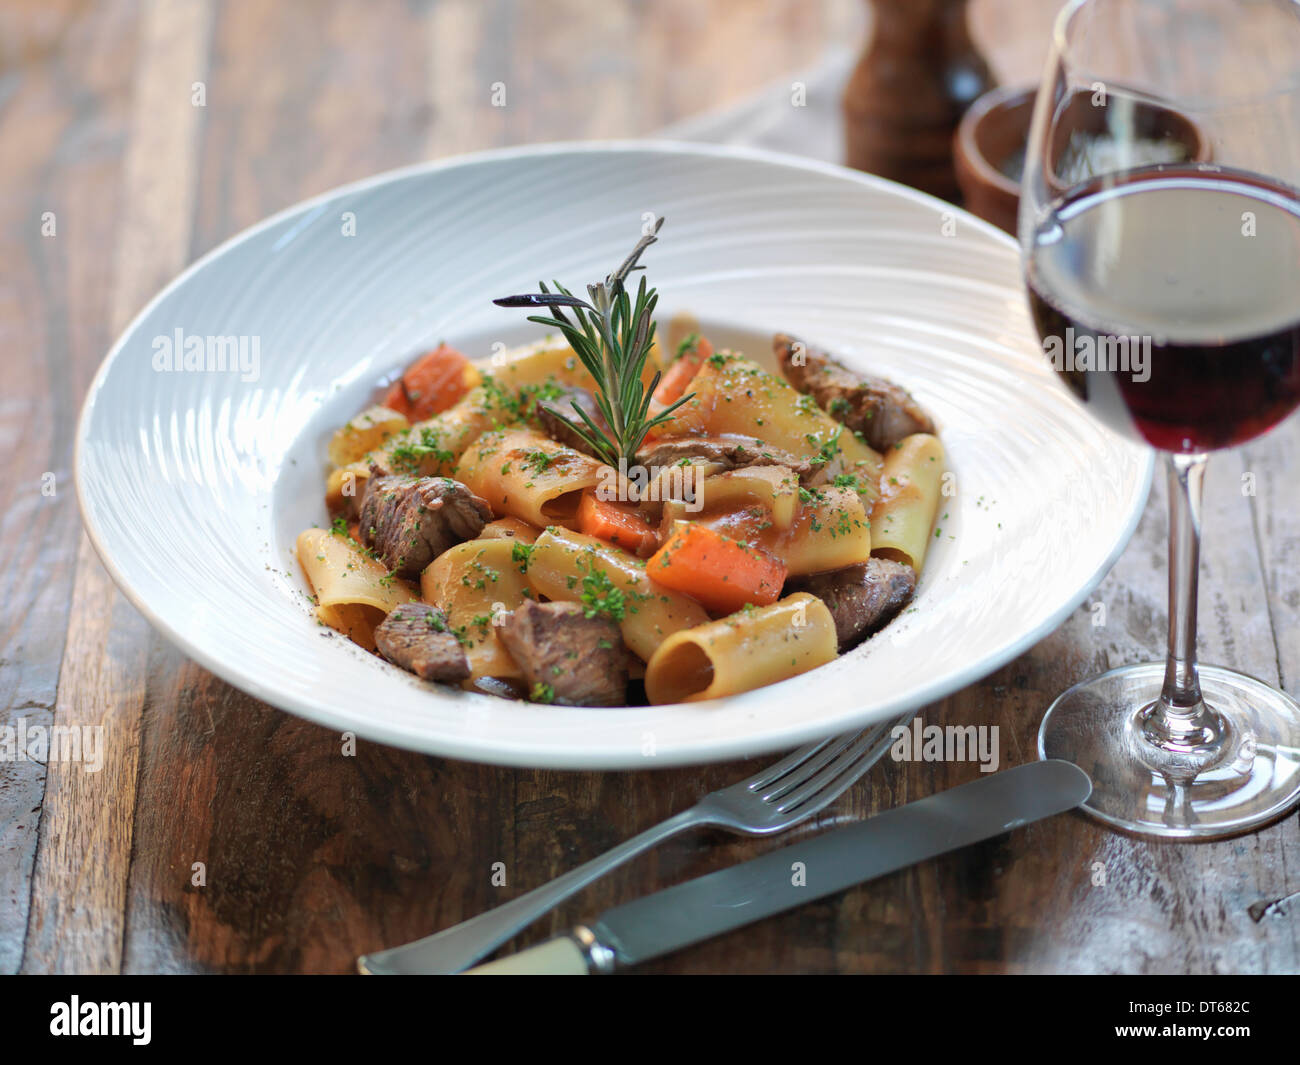 Paccheri pasta with slow cooked ox cheek, fresh rosemary, garlic, bay leaves, tomato and red wine Stock Photo